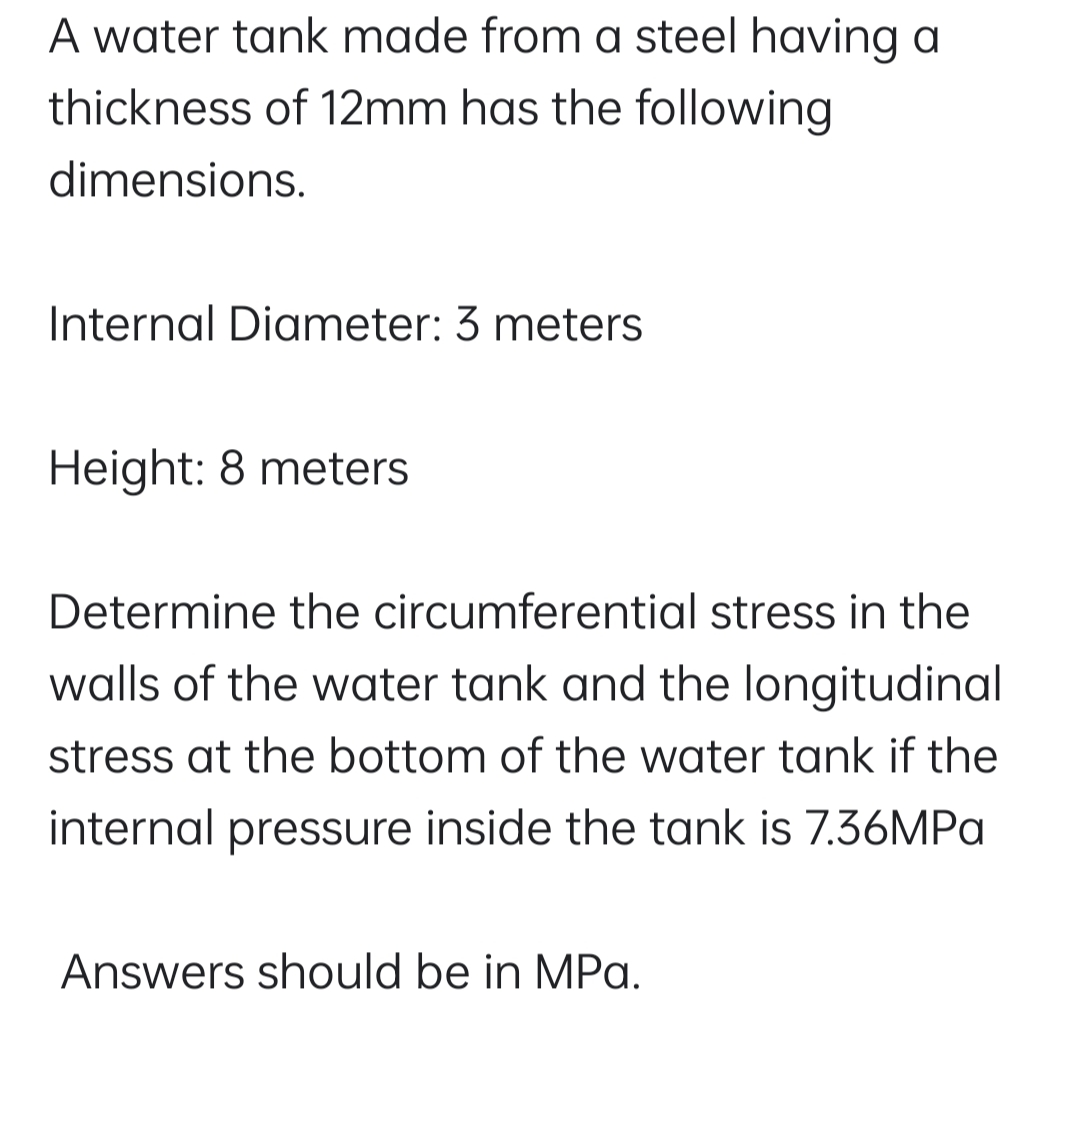 A water tank made from a steel having a
thickness of 12mm has the following
dimensions.
Internal Diameter: 3 meters
Height: 8 meters
Determine the circumferential stress in the
walls of the water tank and the longitudinal
stress at the bottom of the water tank if the
internal pressure inside the tank is 7.36MPA
Answers should be in MPa.
